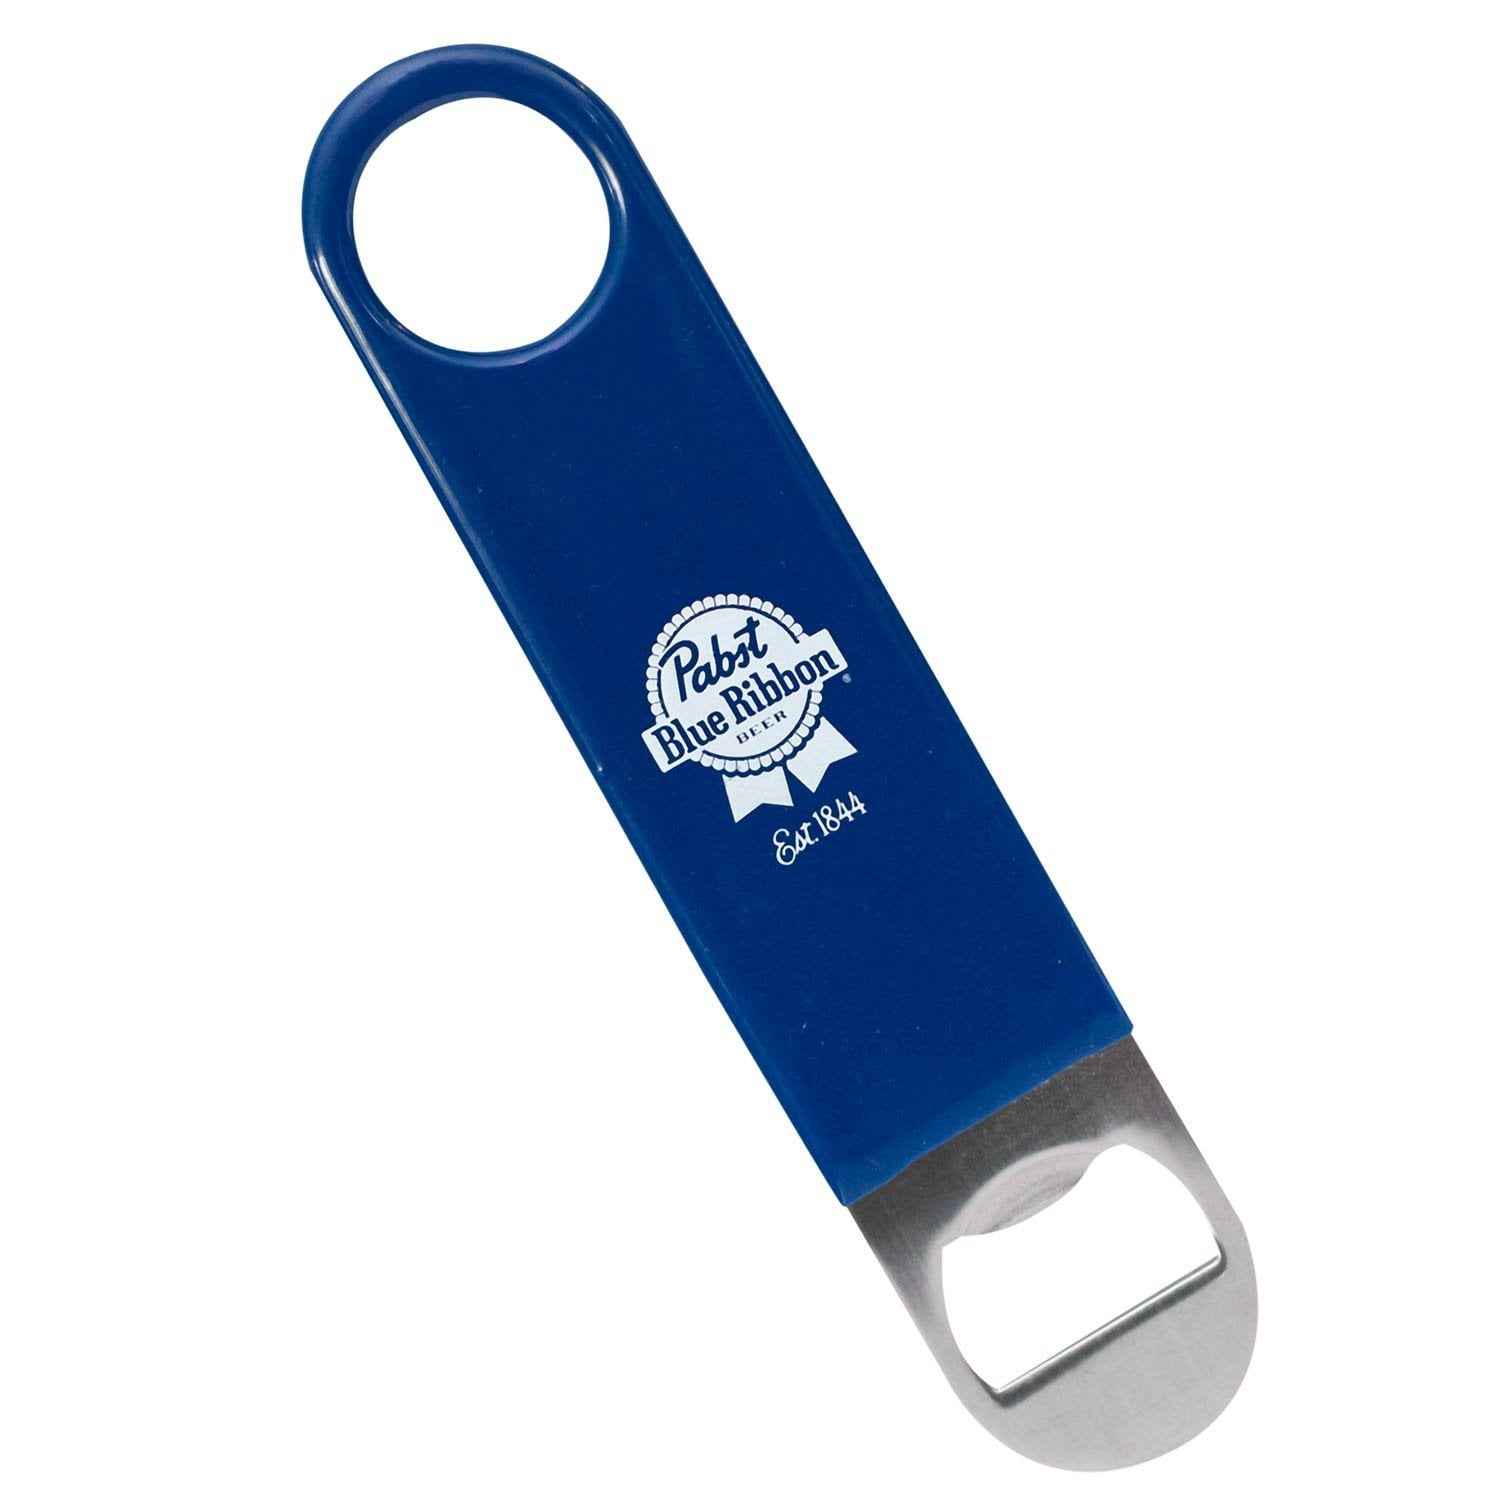 PBR Pabst Blue Ribbon Bartender Speed Bottle Opener with 4 PBR Pins Brand New